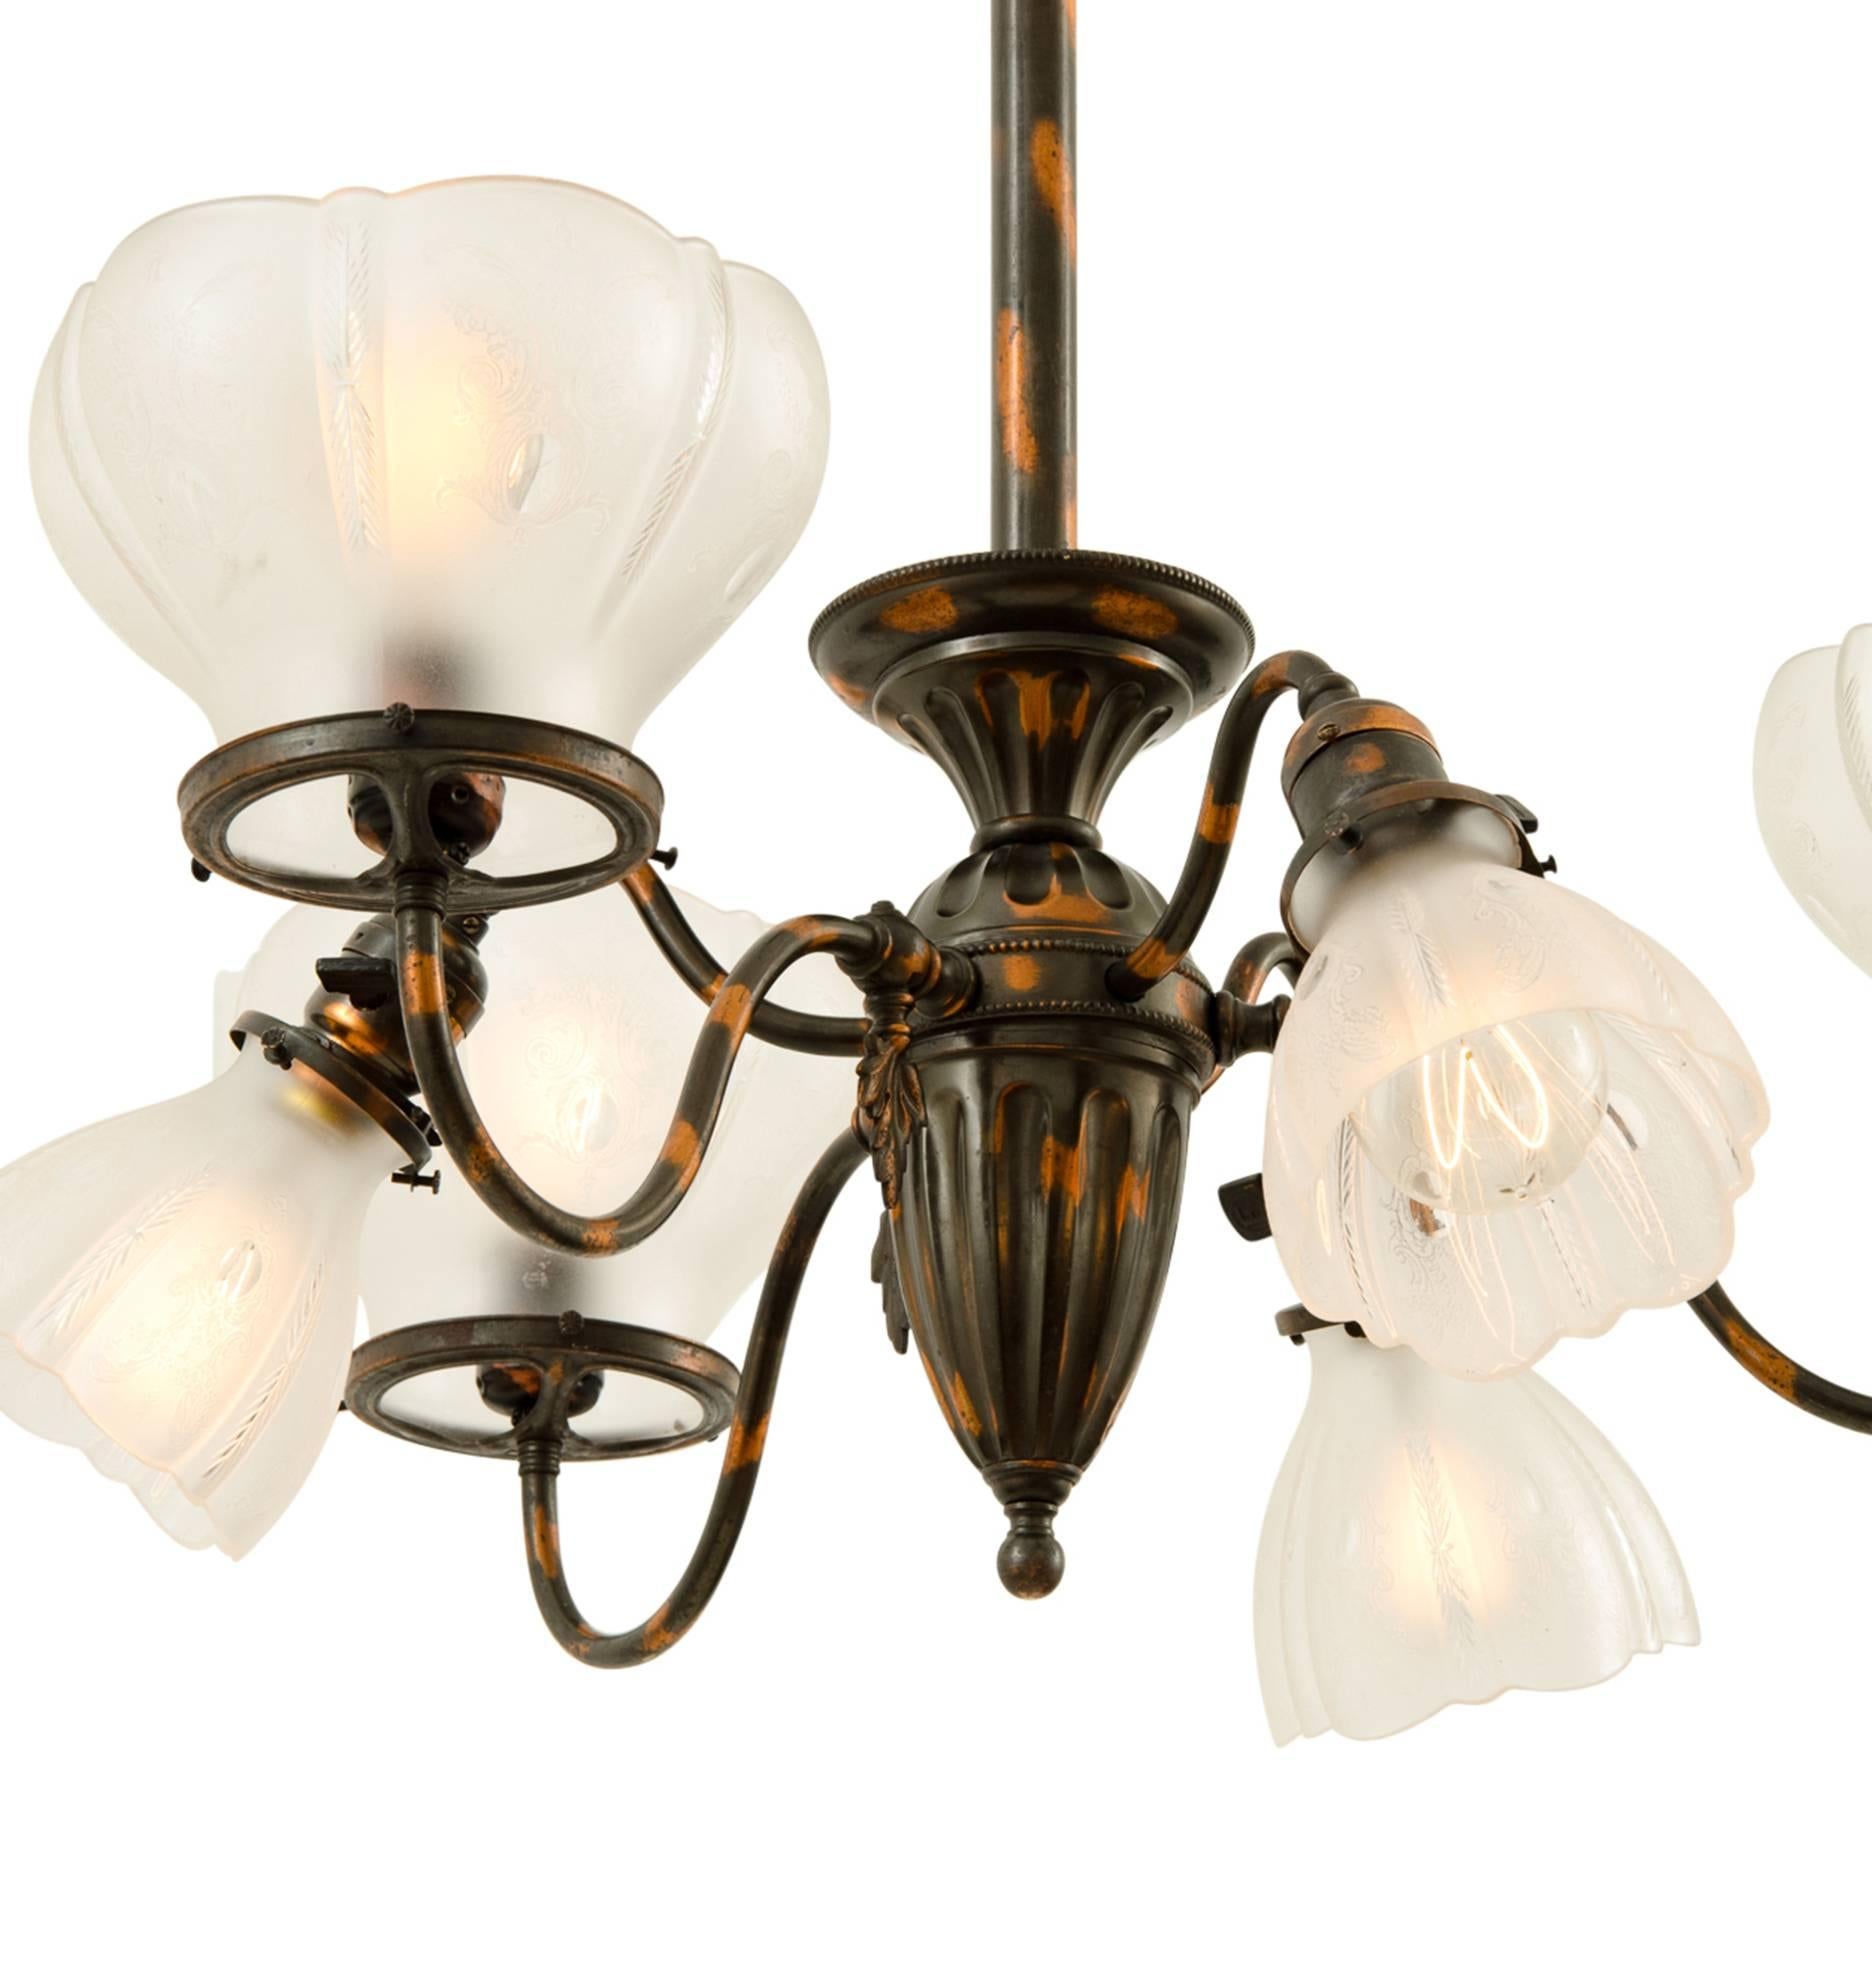 Victorian Transitional Six-Light Chandelier with Japanned Copper Finish, circa 1905